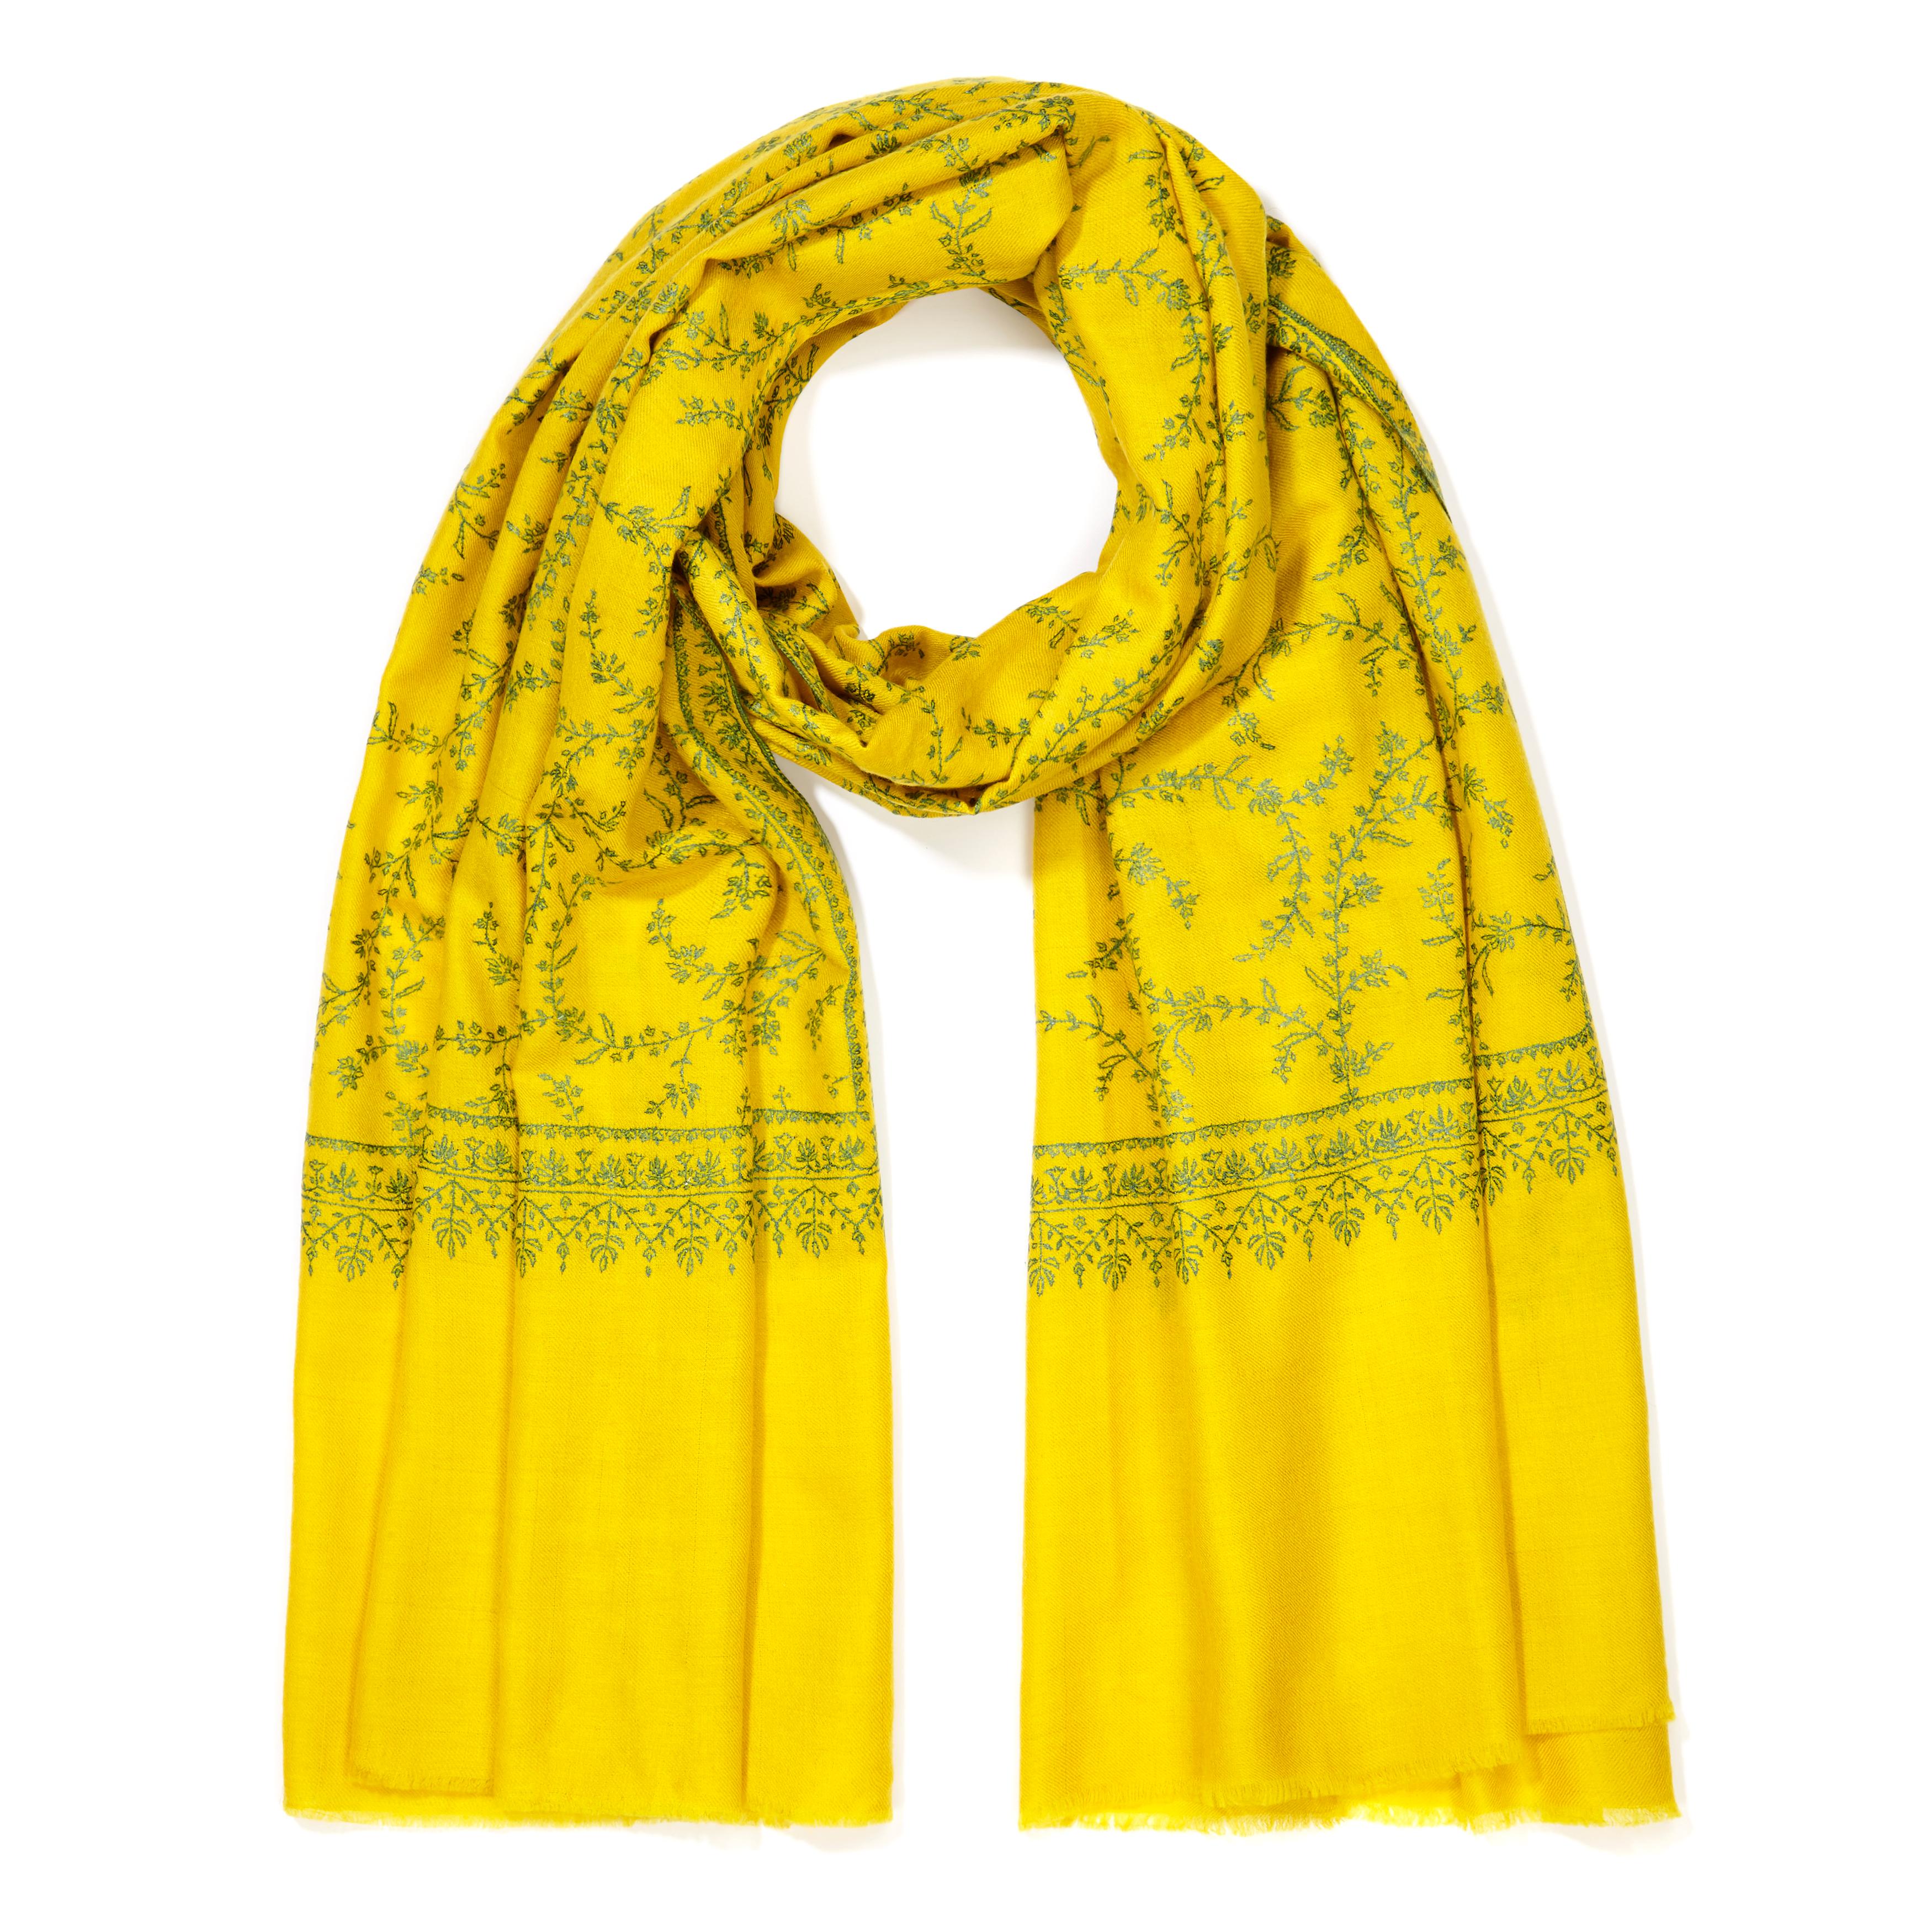 Women's or Men's Hand Embroidered 100% Cashmere Shawl in Yellow Made in Kashmir India